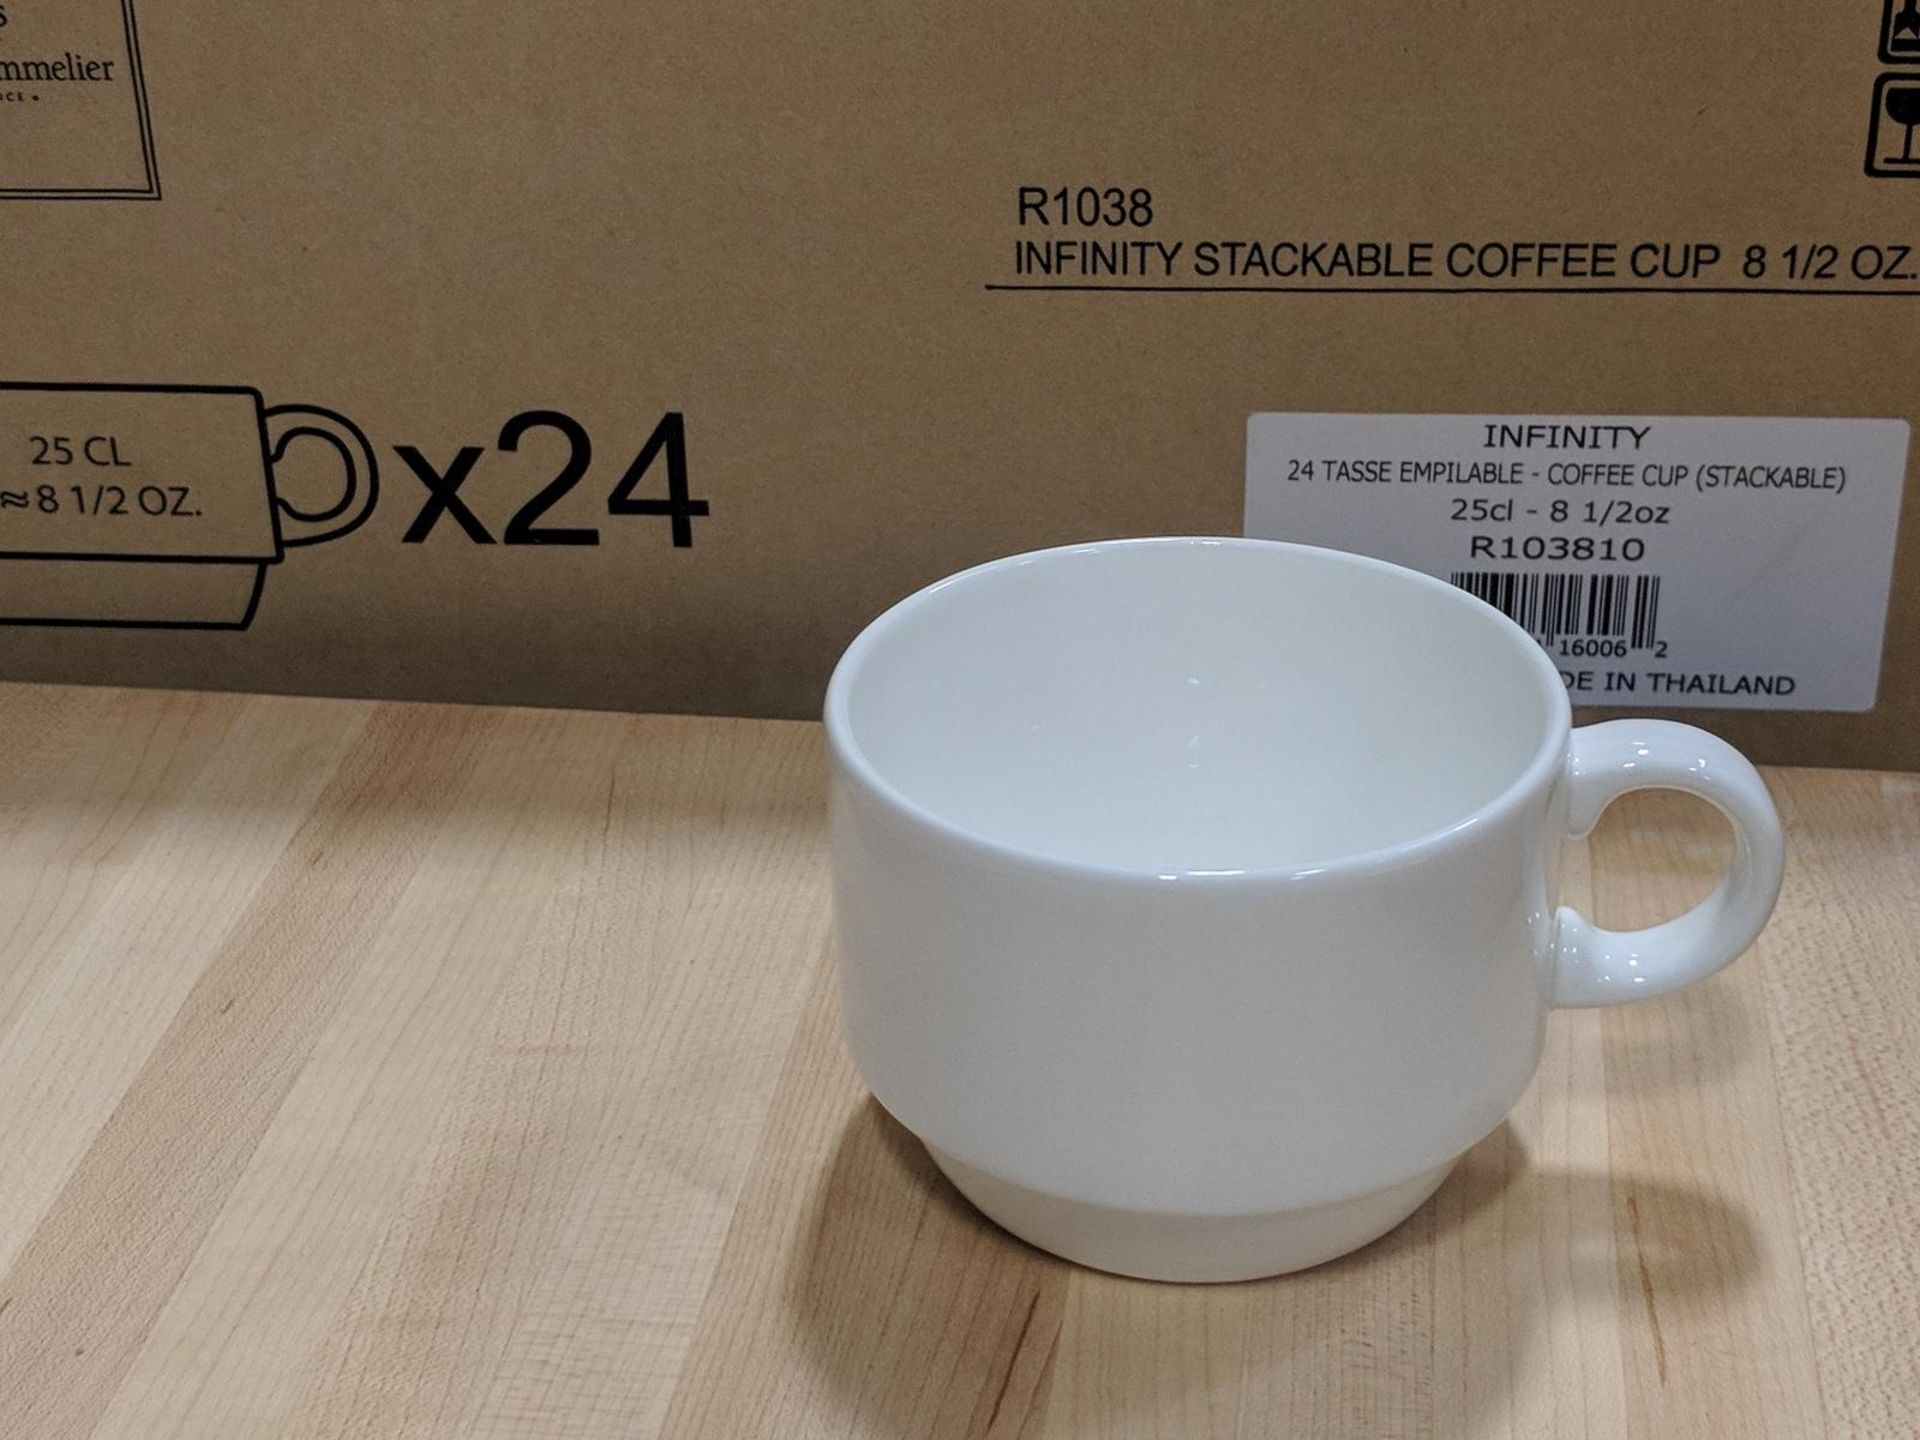 8.5oz/250ml Infinity Stacking Coffee Cups - Lot of 24 (1 Case), Arcoroc R1038